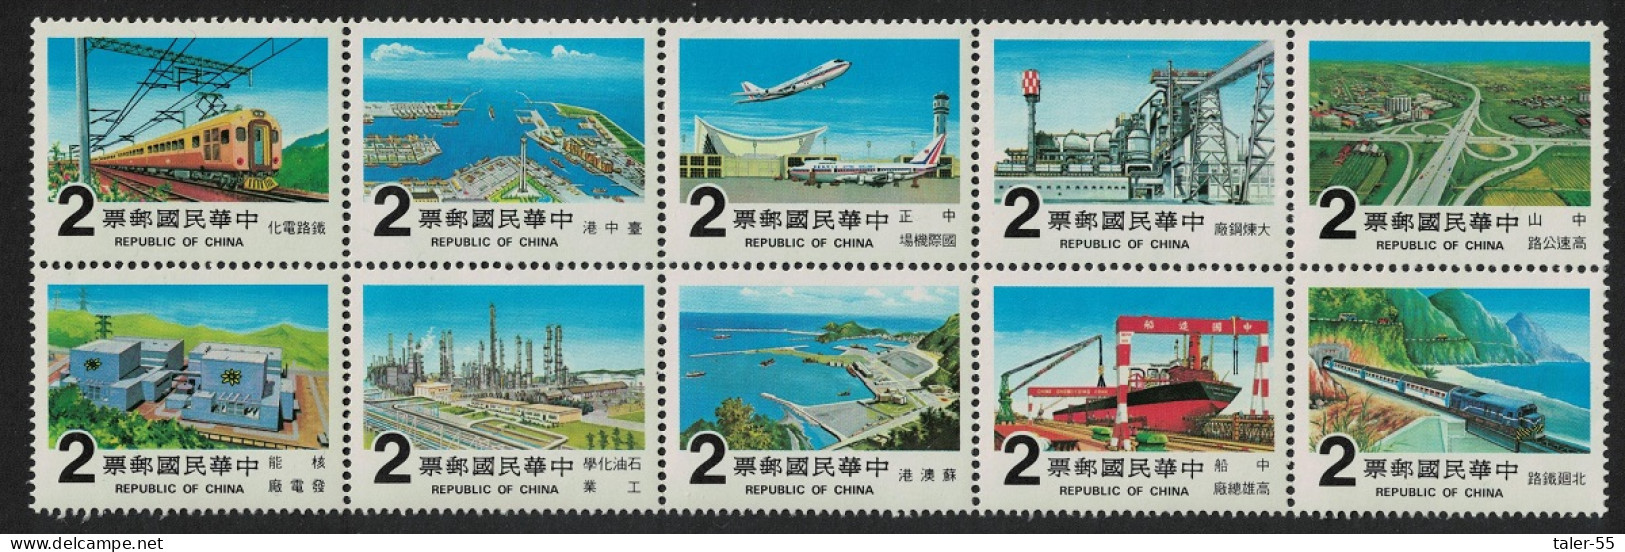 Taiwan Completion Of Ten Major Construction Projects 10v 1980 MNH SG#1316-1325 - Nuovi